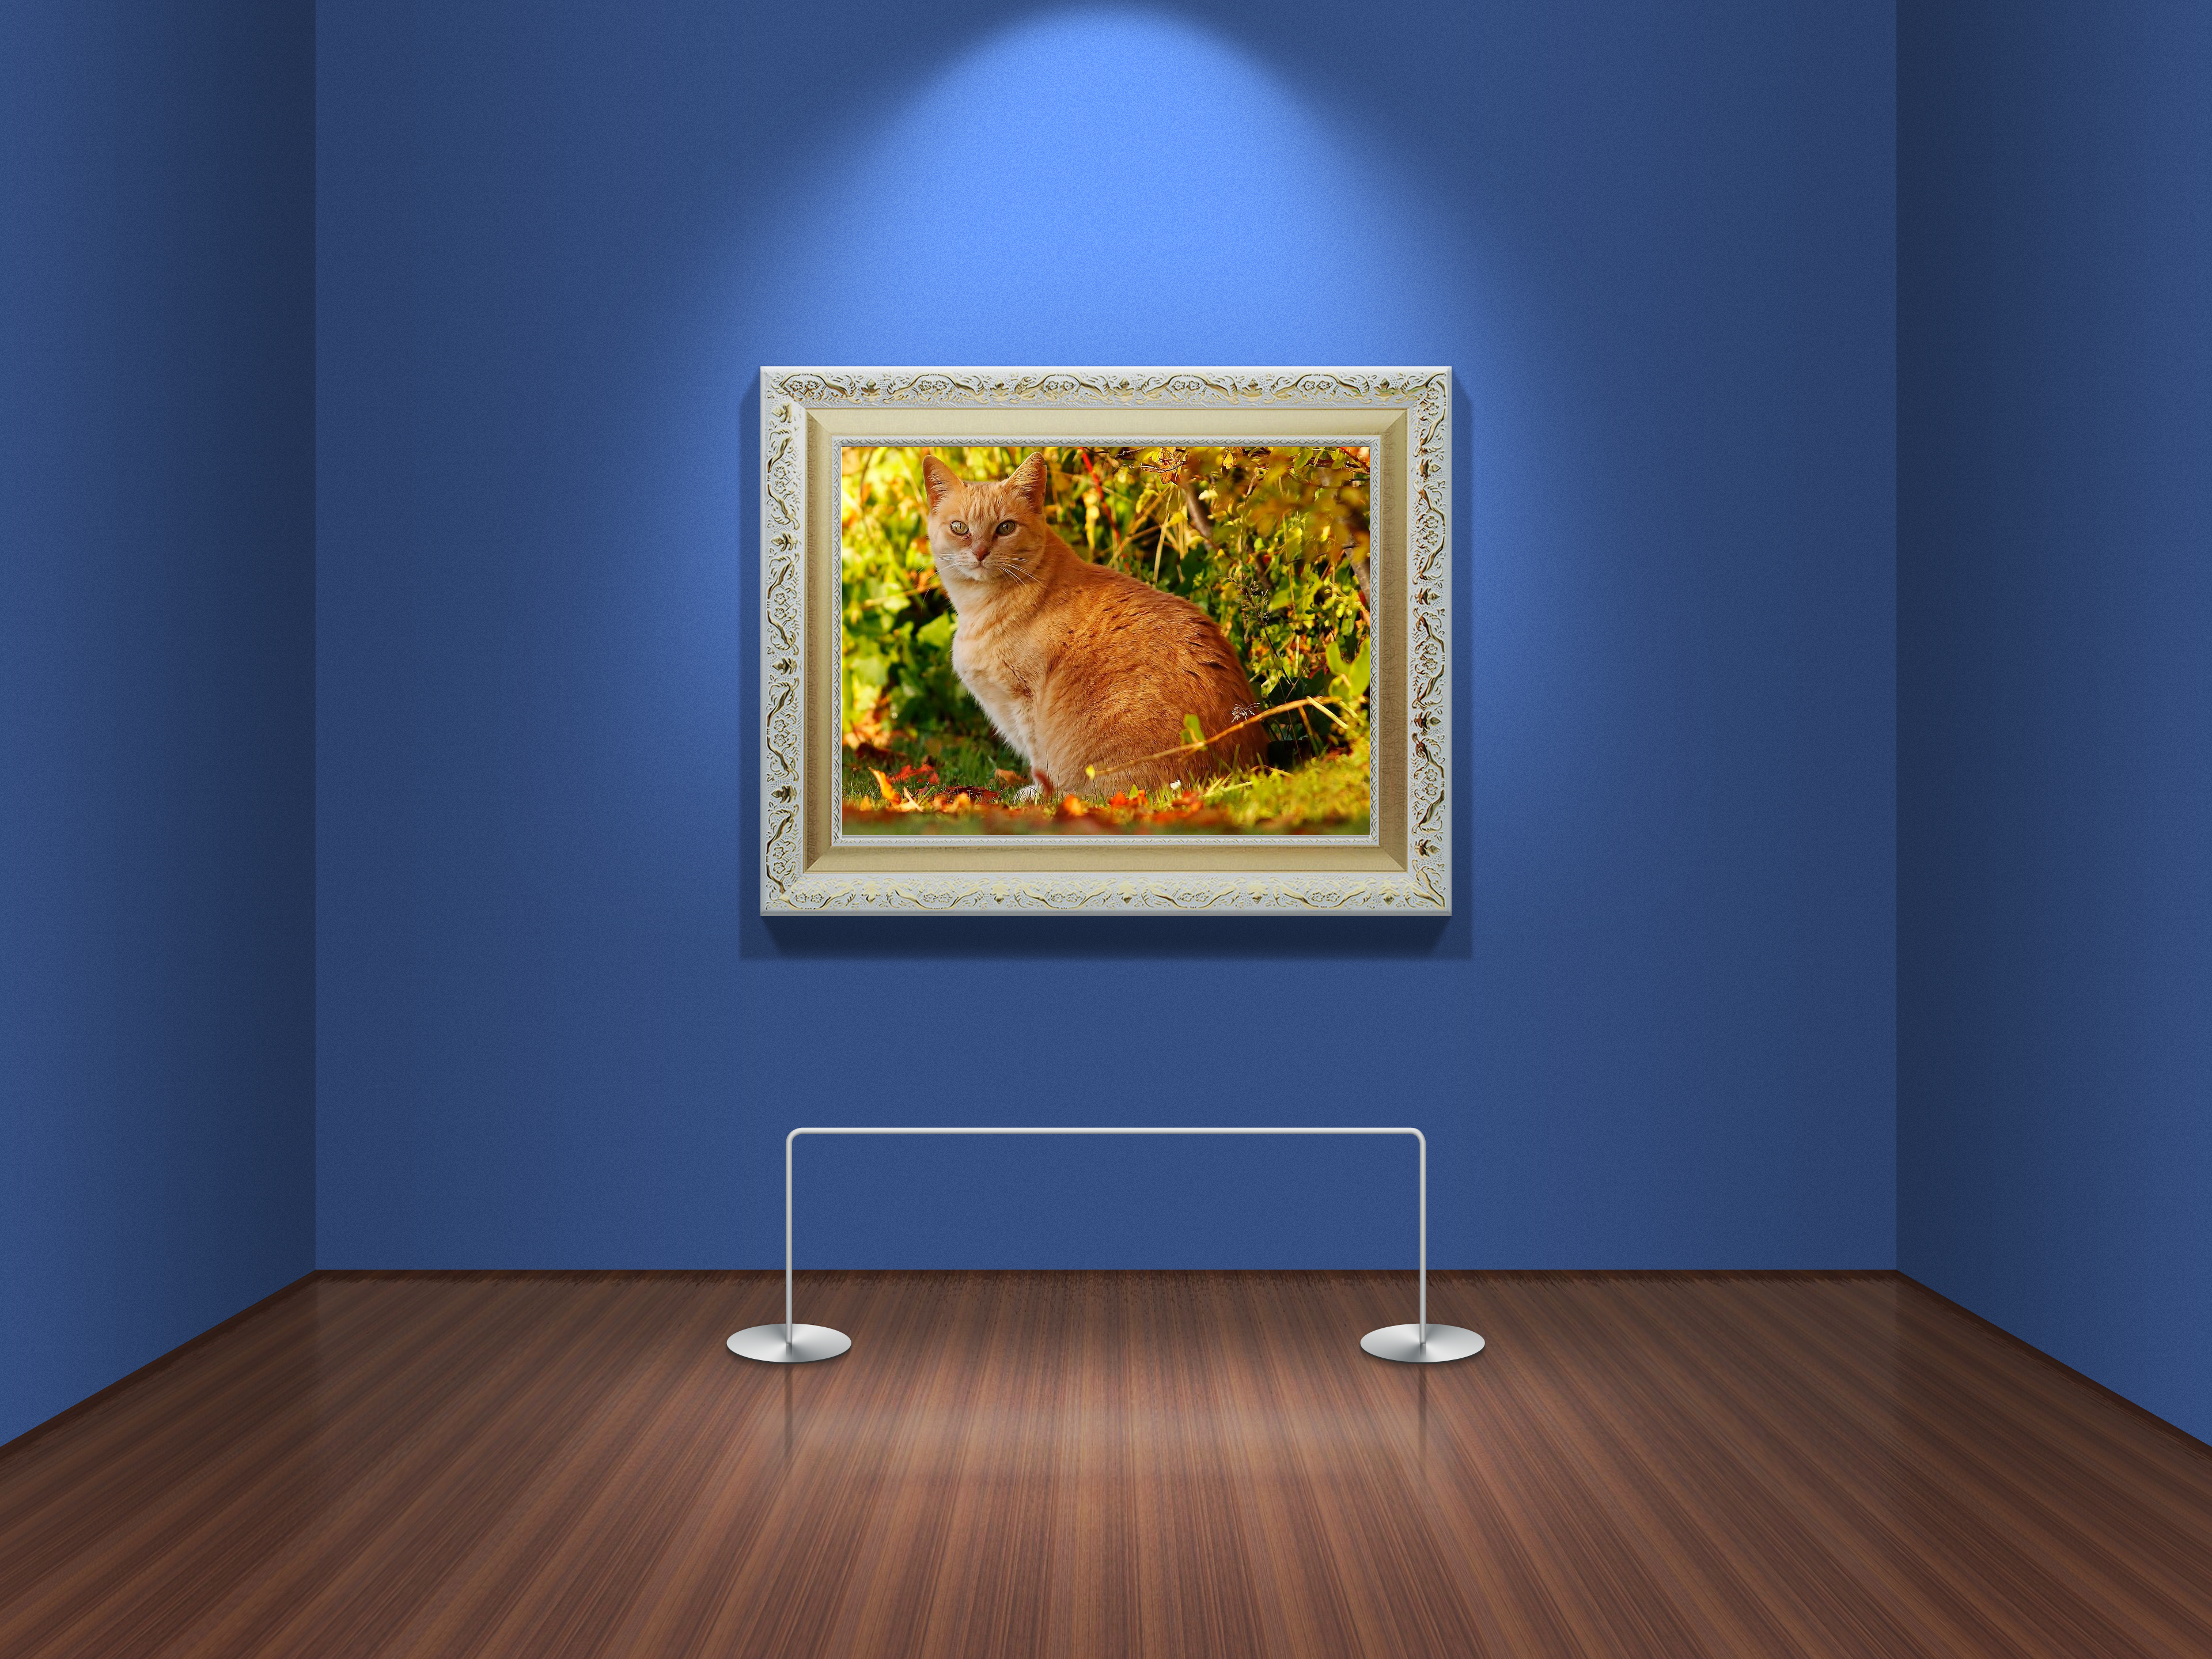 Art Gallery Picture Frames Room Cats 3840x2880